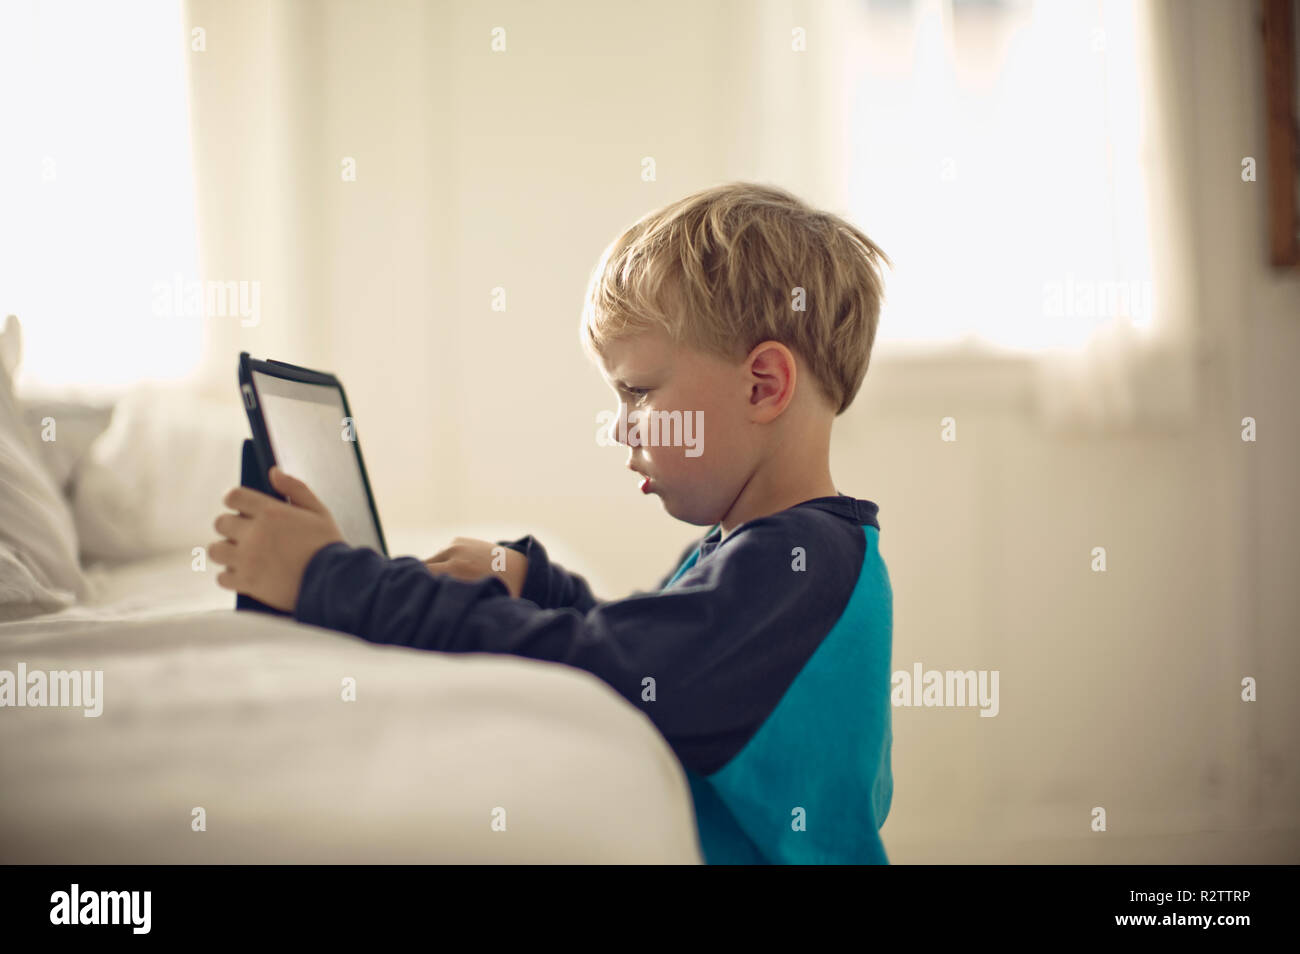 Young boy looking serious as he plays with a portable information device. Stock Photo